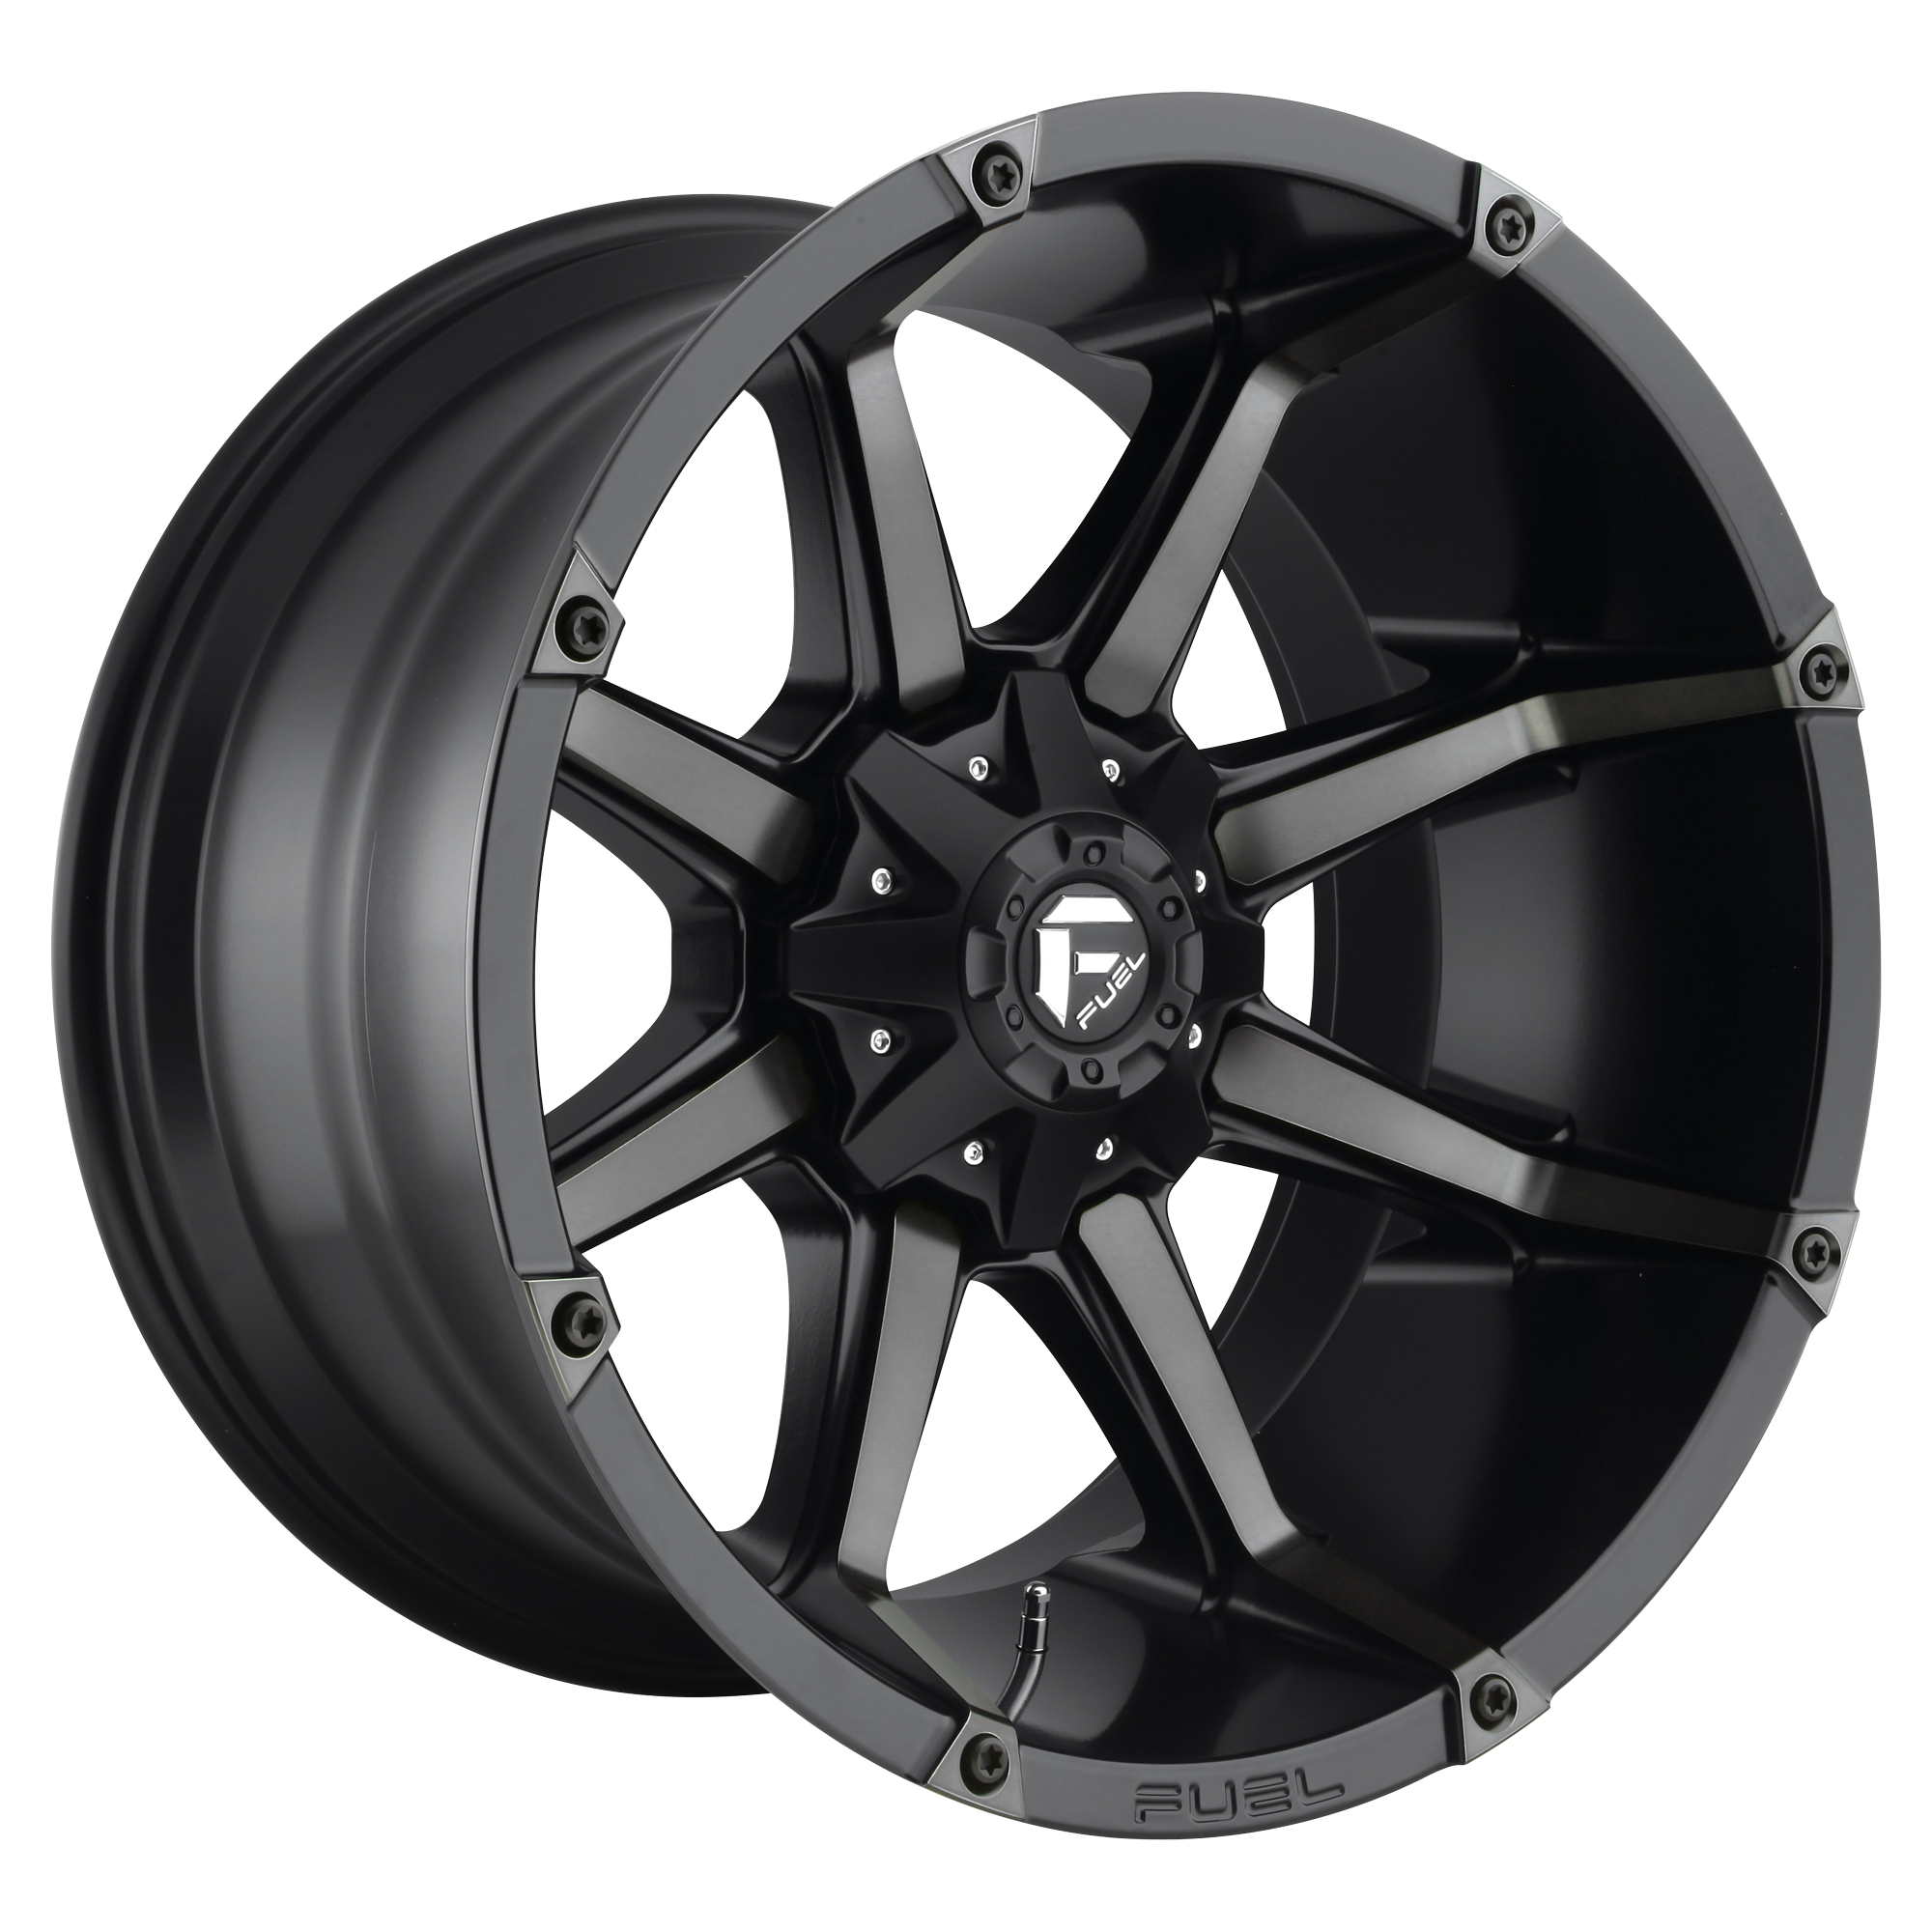 COUPLER 20x9 8x180.00 MATTE BLACK DOUBLE DARK TINT (20 mm) - Tires and Engine Performance